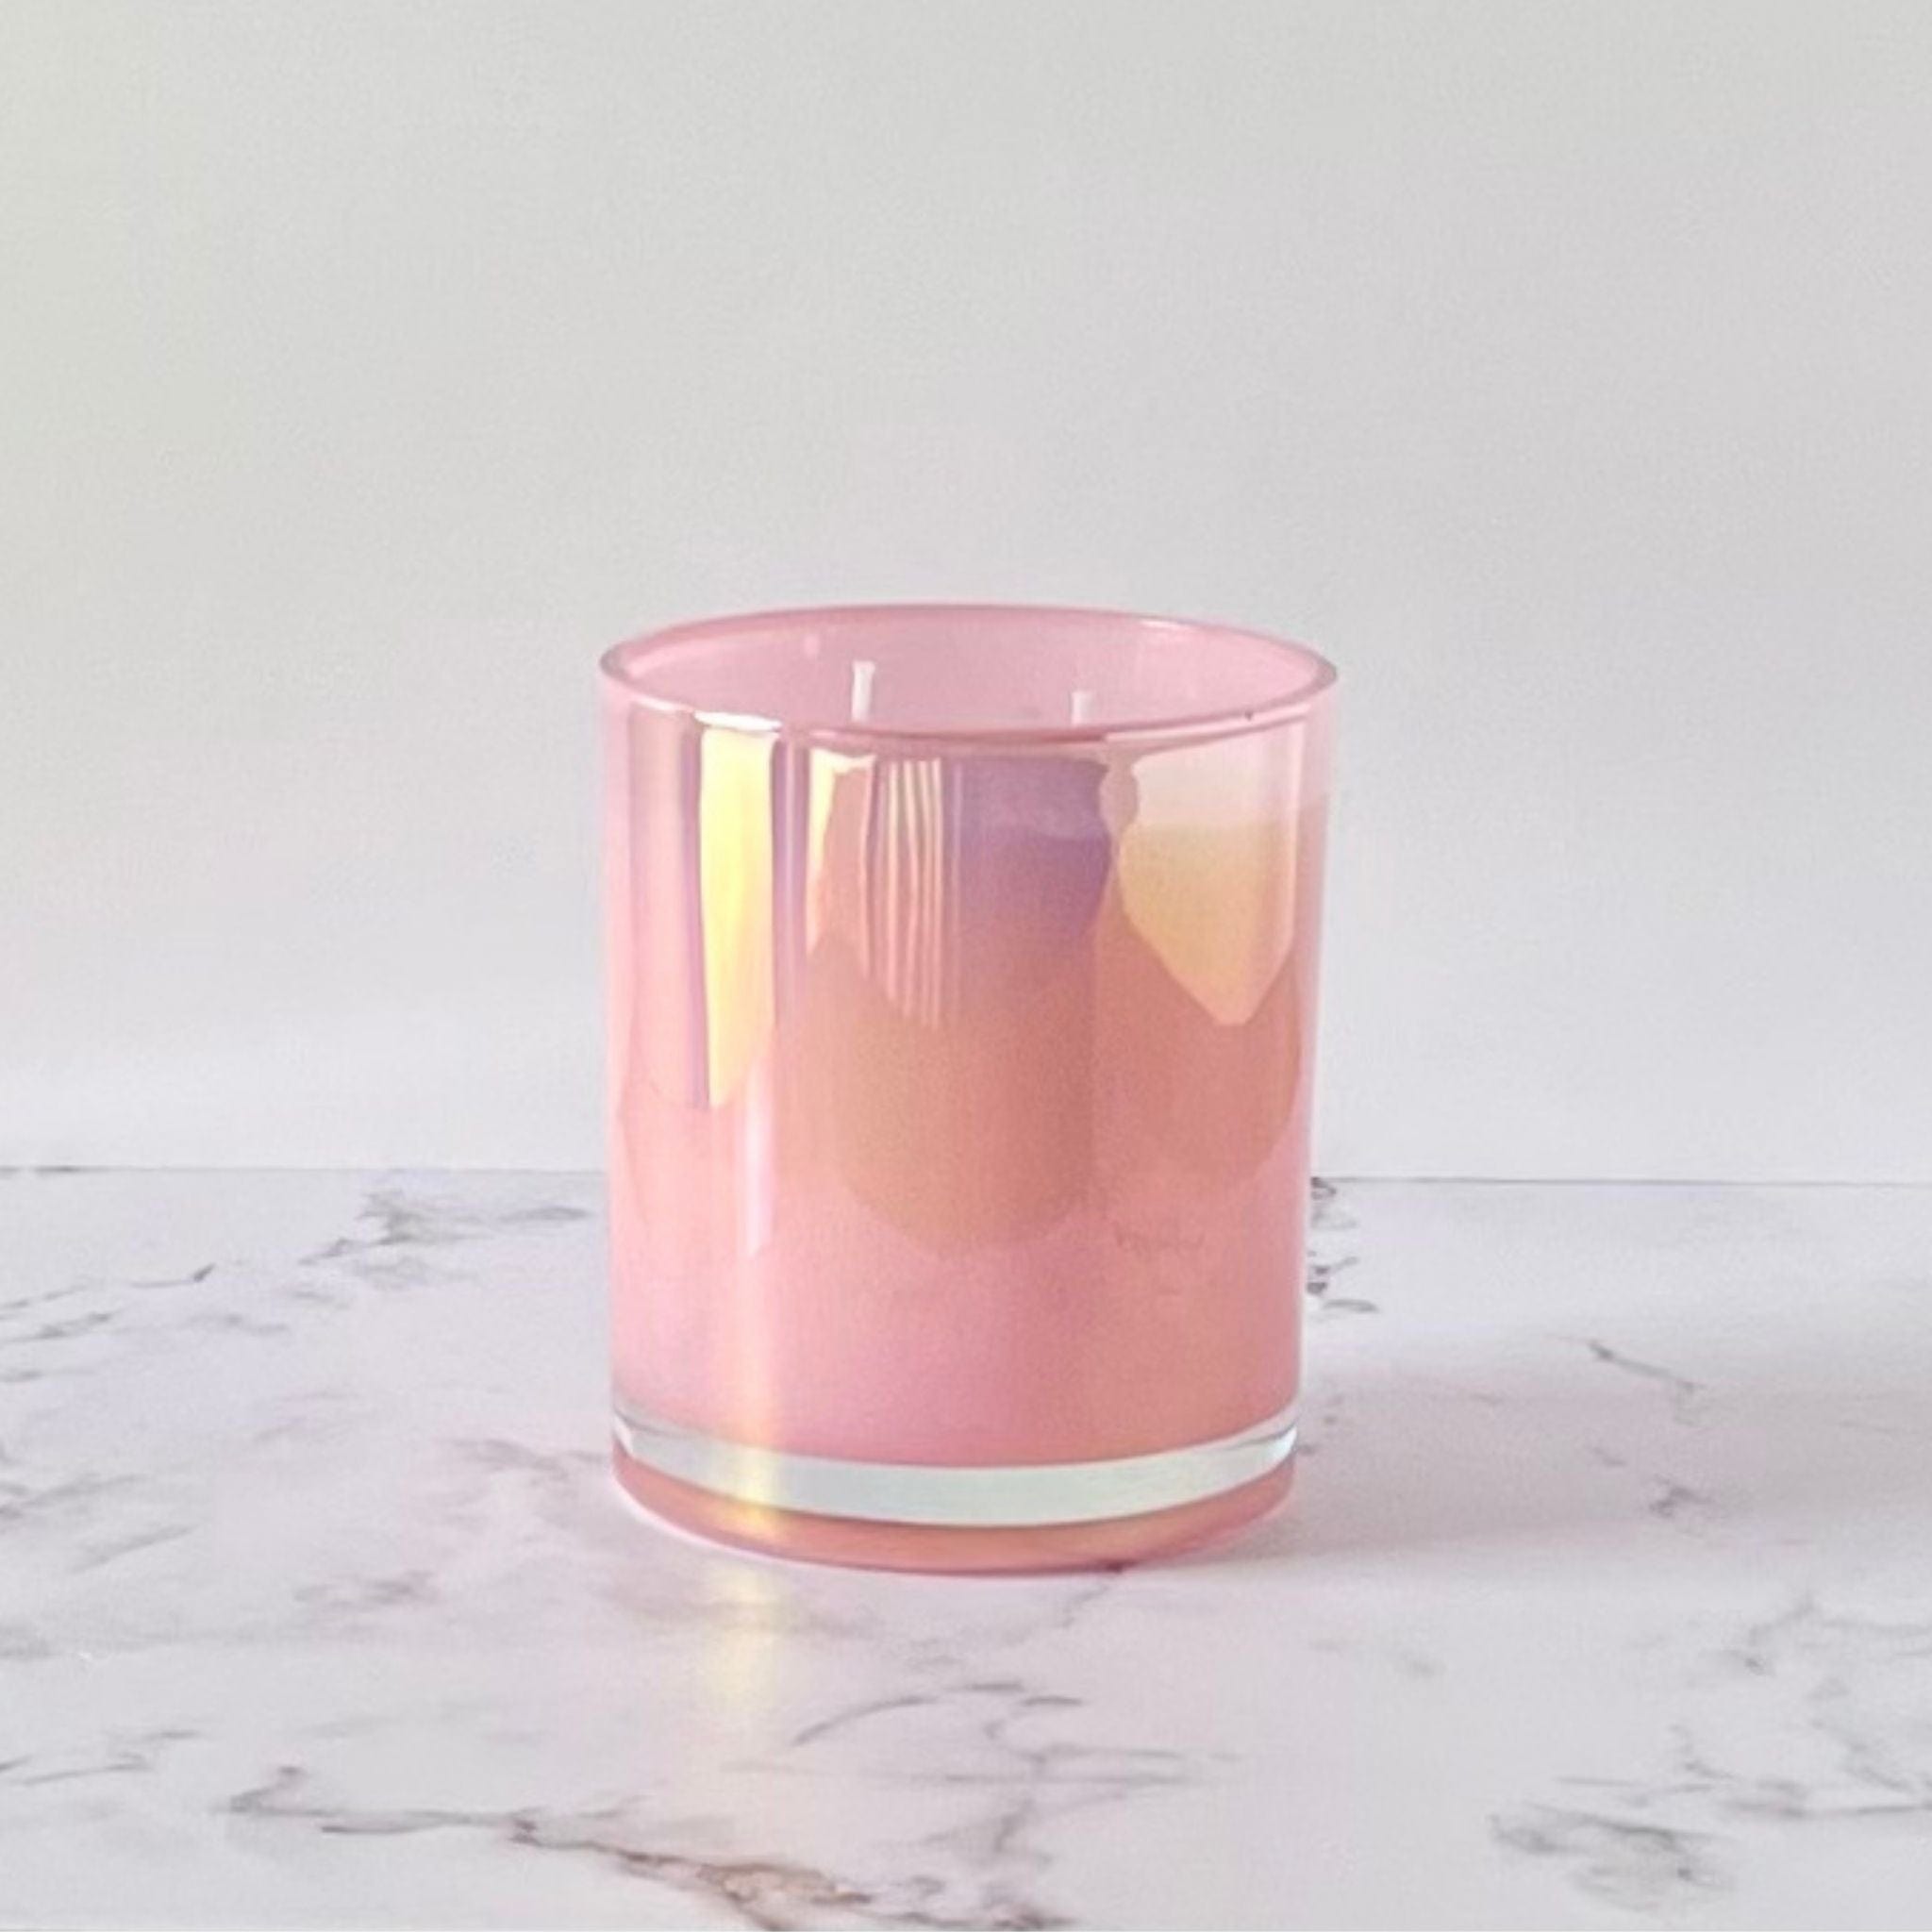 Private Label Candles by Velavida Candles 14 Oz Pink Iridescent Wholesale candles in bulk